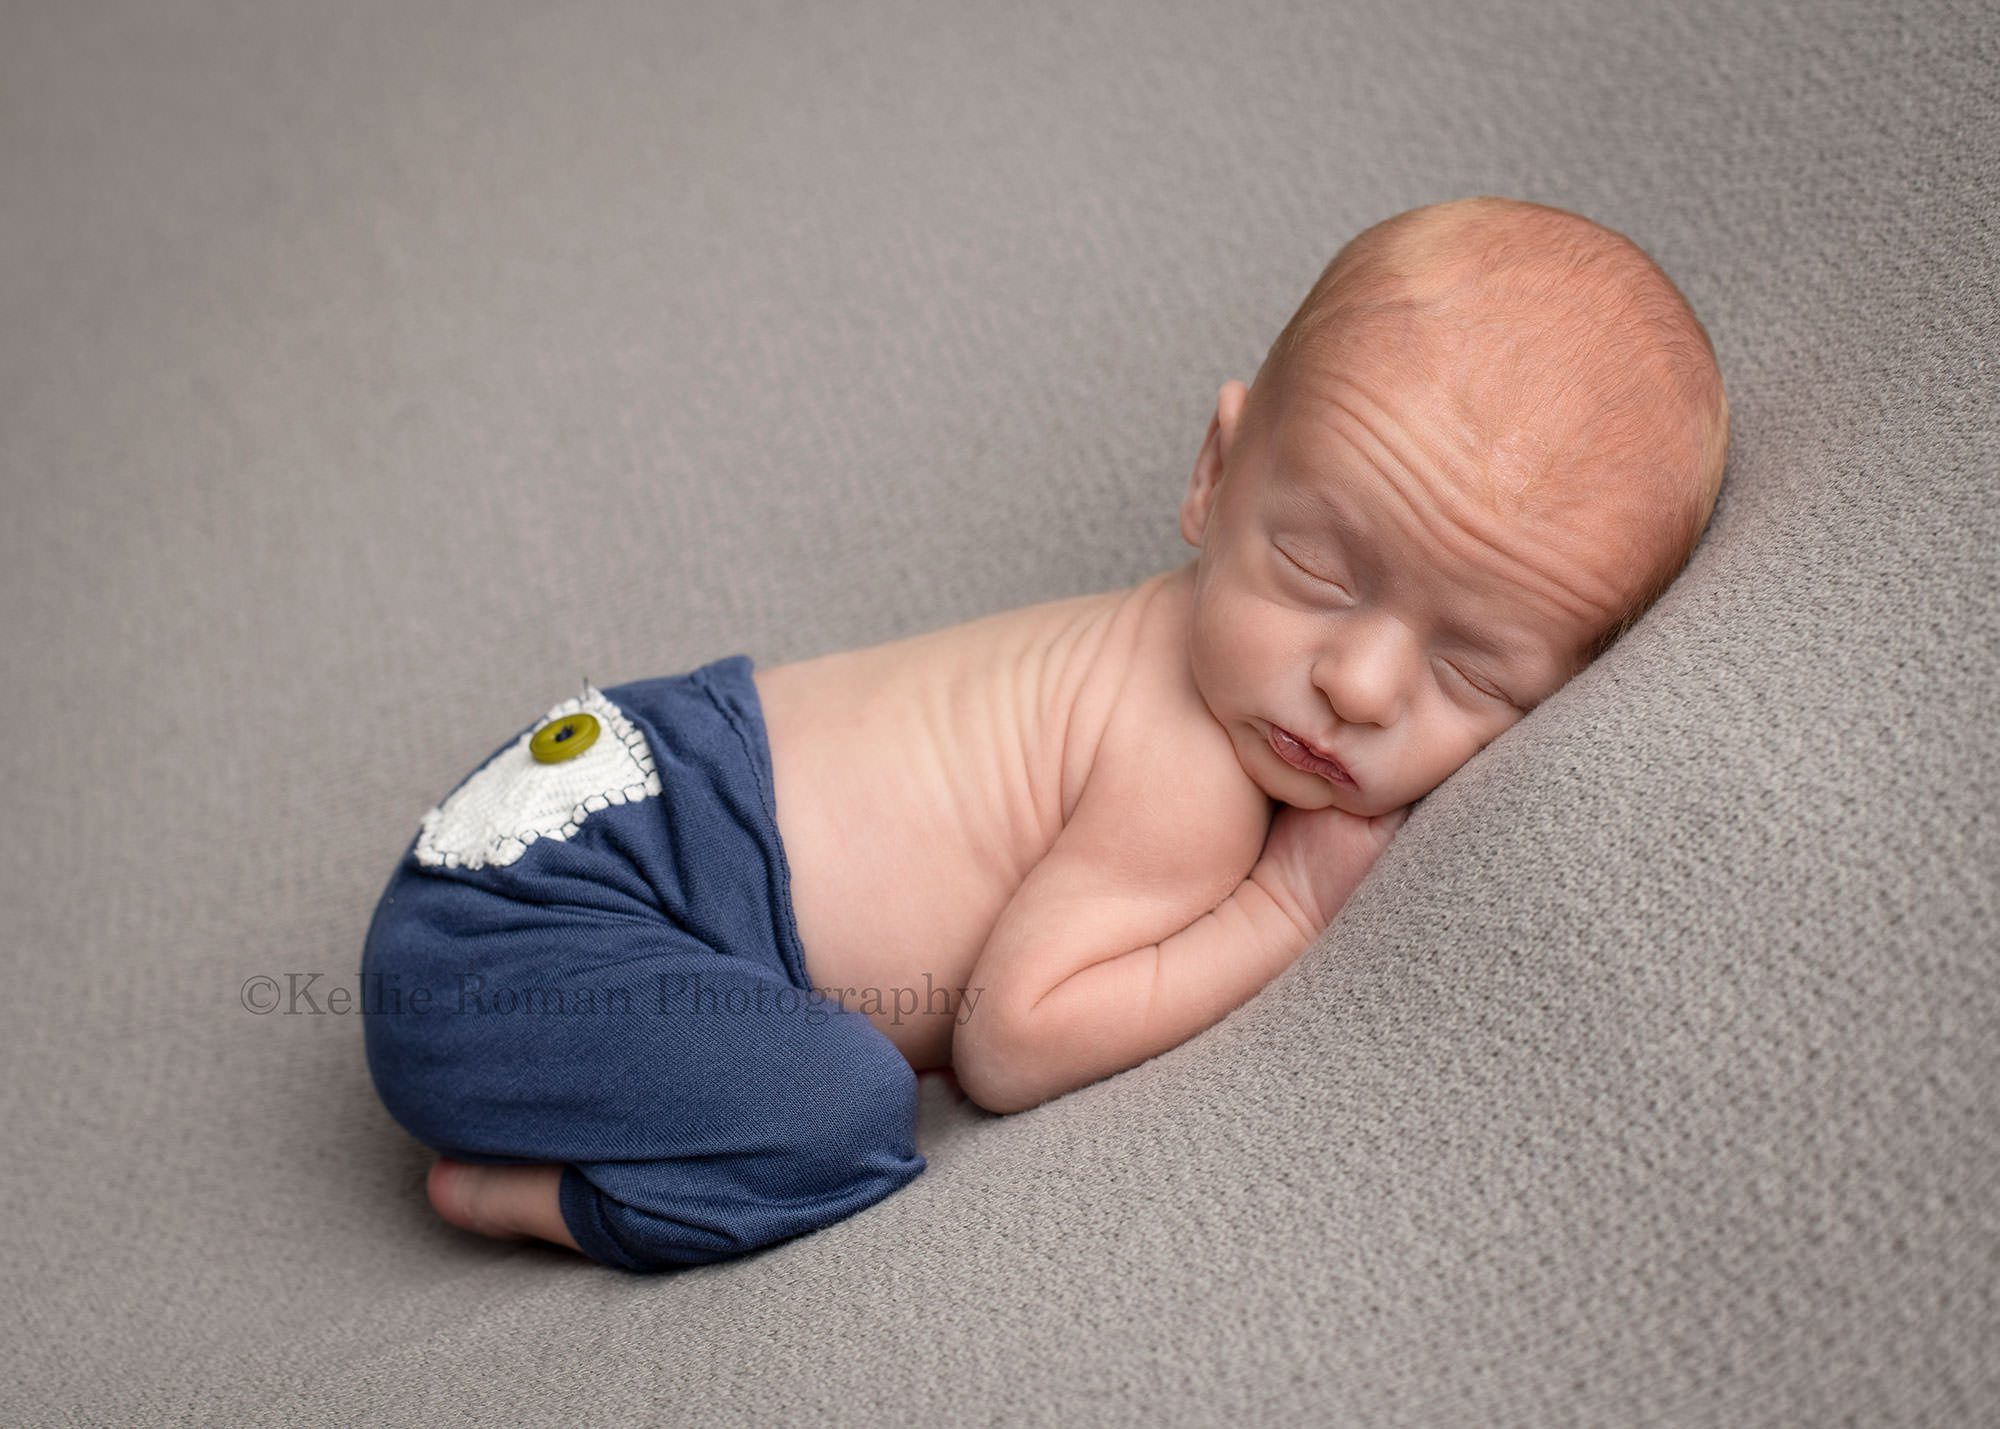 newborn twin pics a newborn boy posed onto of a grey blanket in milwaukee photography studio he has on navy pants and is sleeping